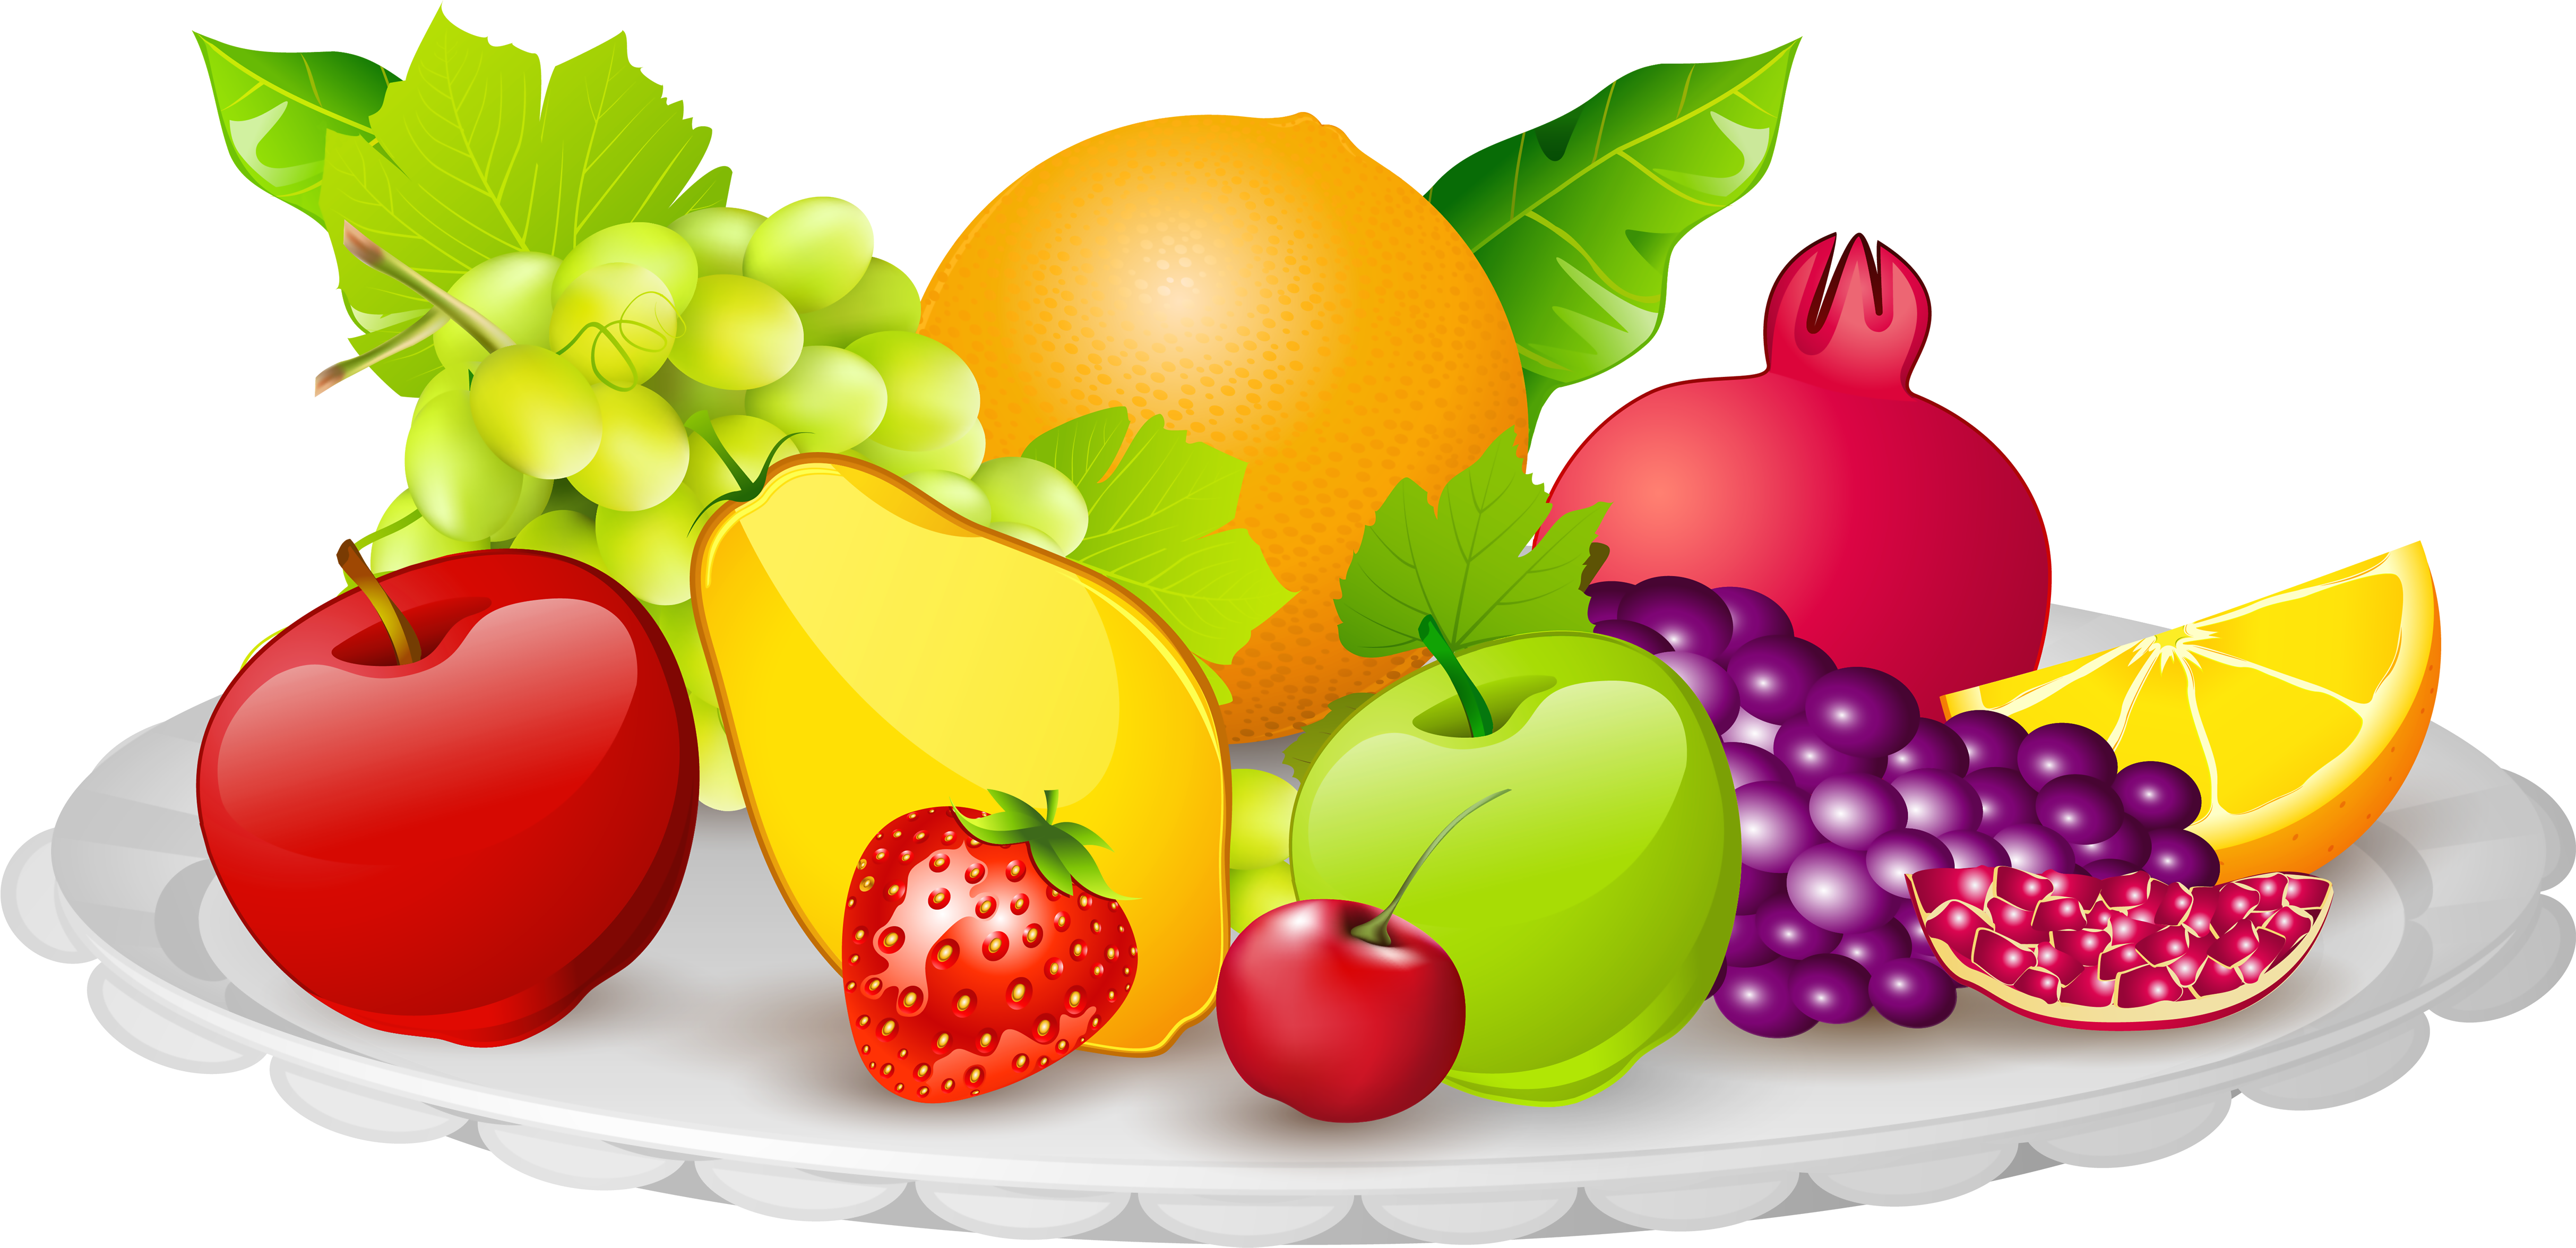 0 Result Images Of Fruit Bowl Png Cartoon Png Image Collection